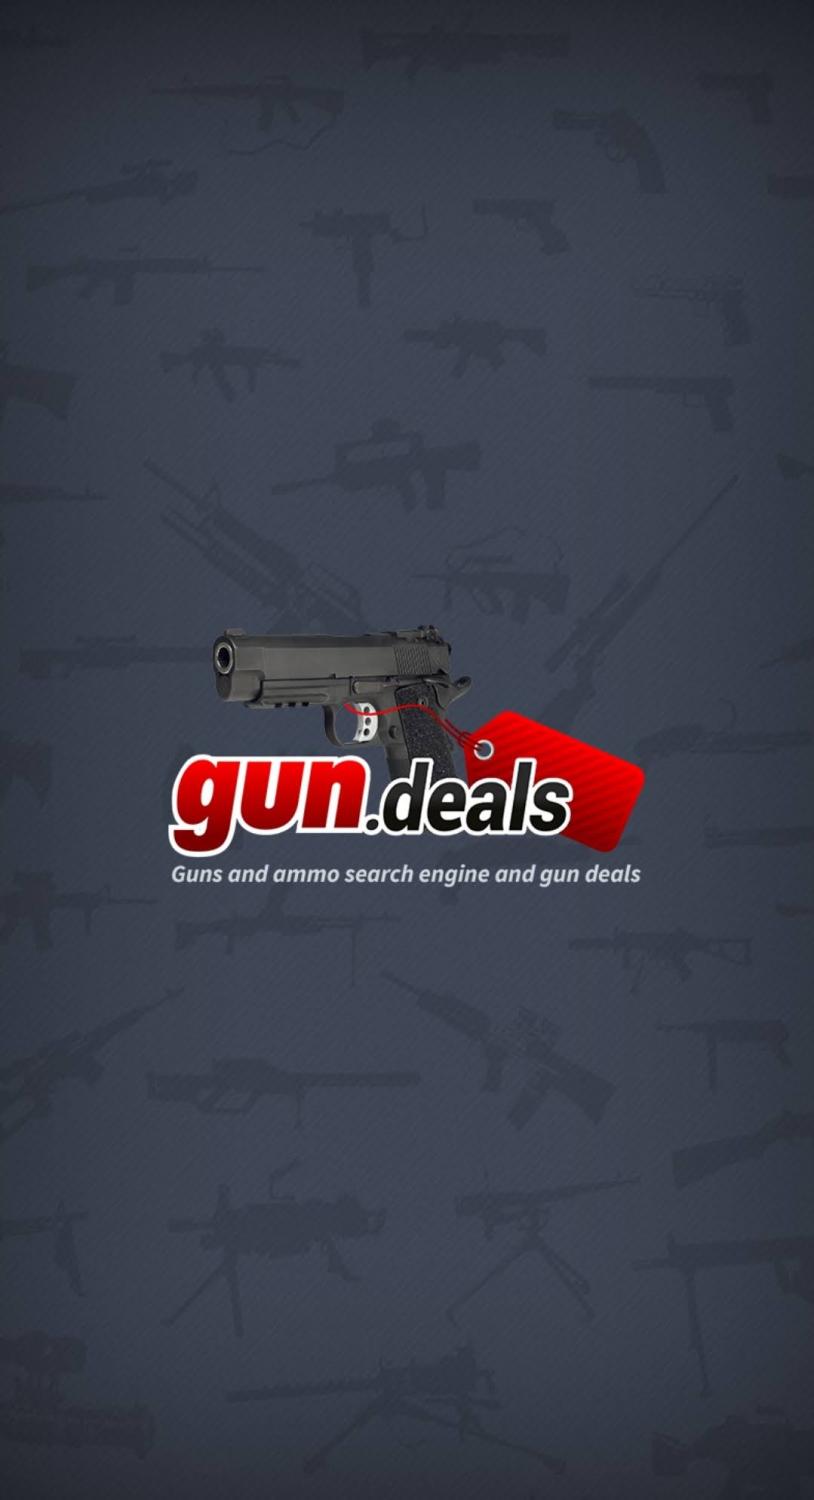 Updated Gun.Deals Android and iOS Apps - Download The Newest Version And Check Them Out - Details in the description